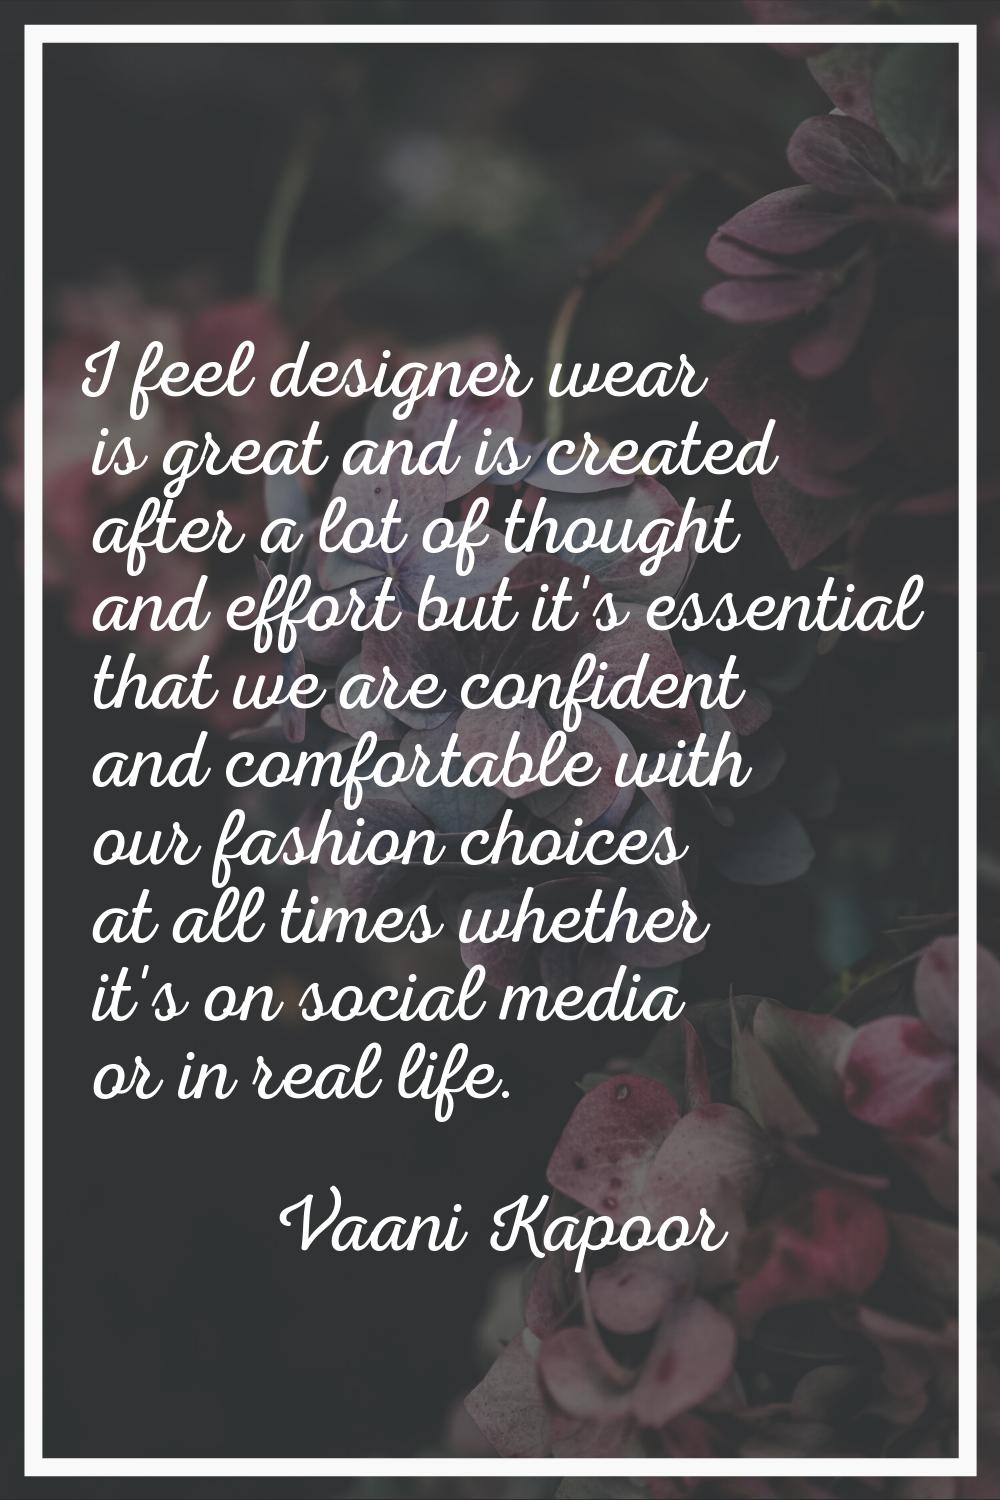 I feel designer wear is great and is created after a lot of thought and effort but it's essential t